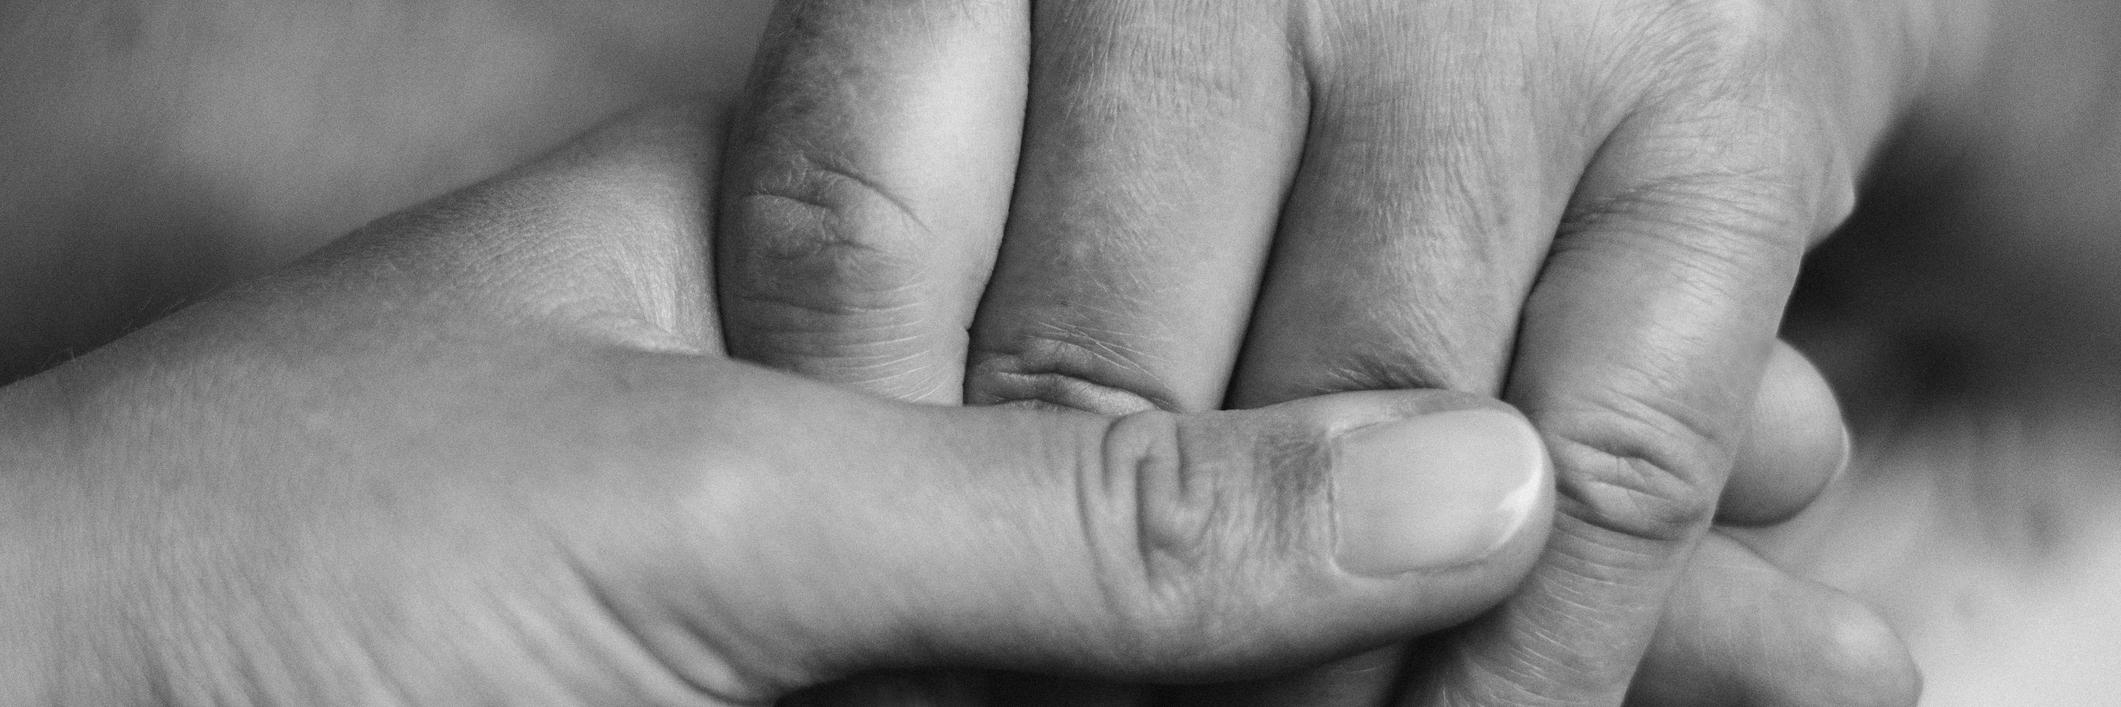 black and white photo of hands holding